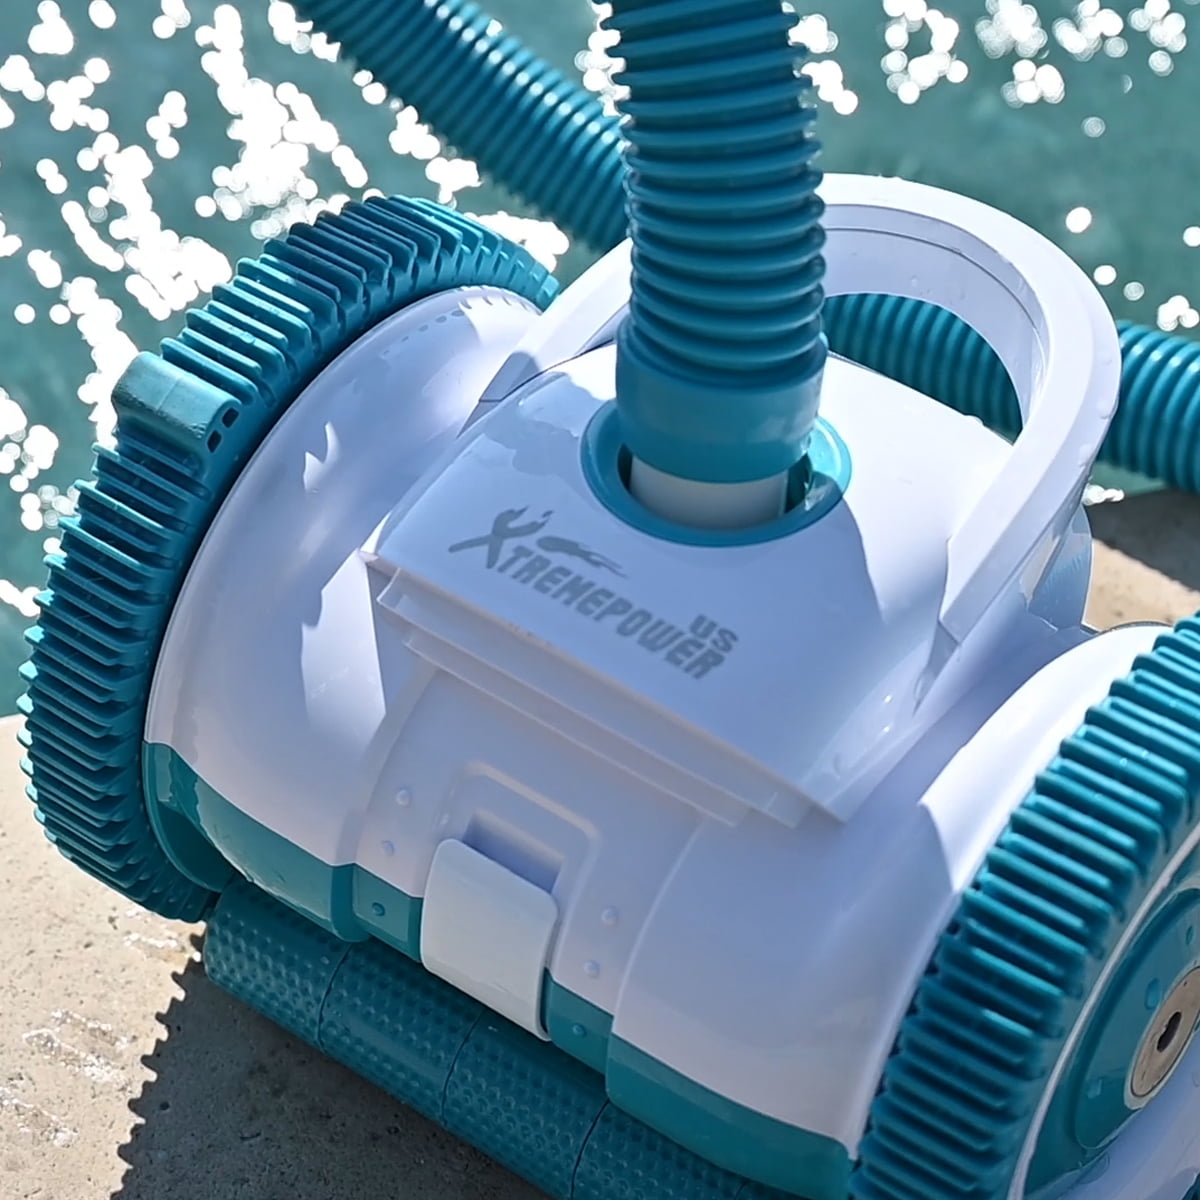 XtremepowerUS Robotic Pool Cleaner with Control Boxtra-Efficient Dual  Scrubbing Brushes